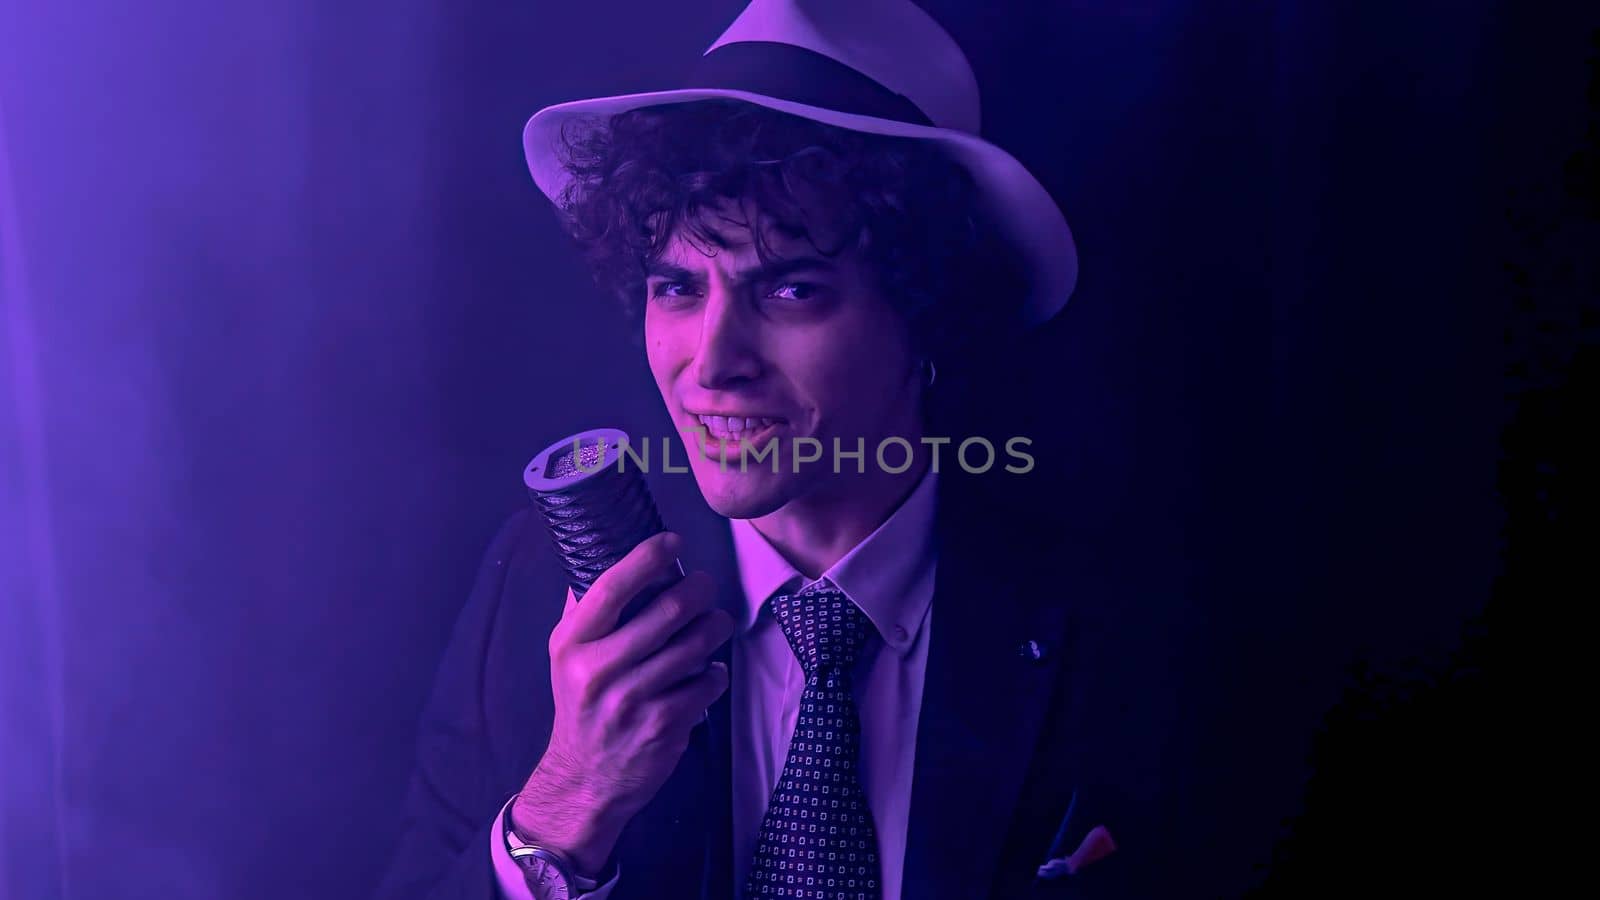 A playful and energetic young man singing a song. With a microphone in hand and a mischievous twinkle in his eye. Talented performer with his infectious energy and hilarious facial expressions.